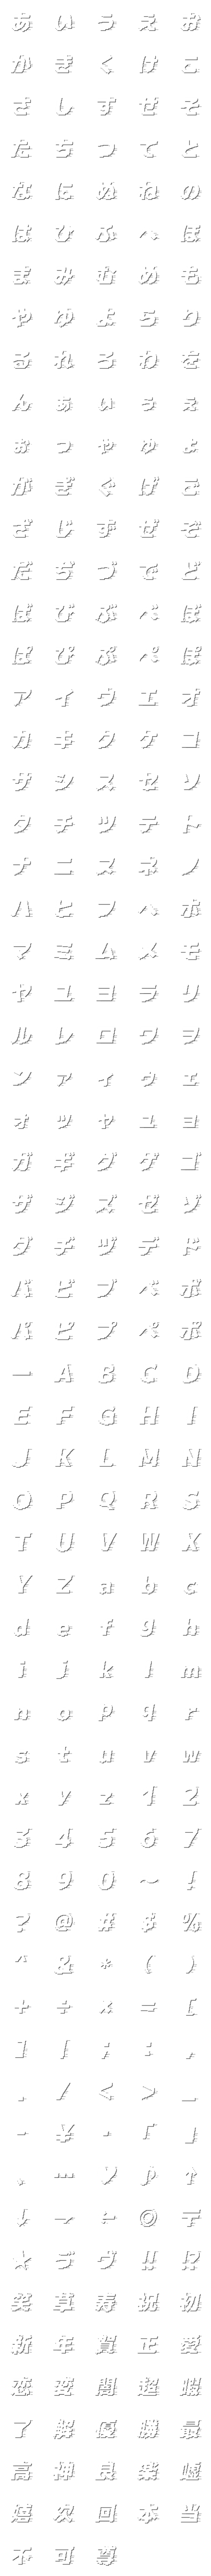 [LINE絵文字]疾走ドットデコ文字 -ゴシック体-の画像一覧